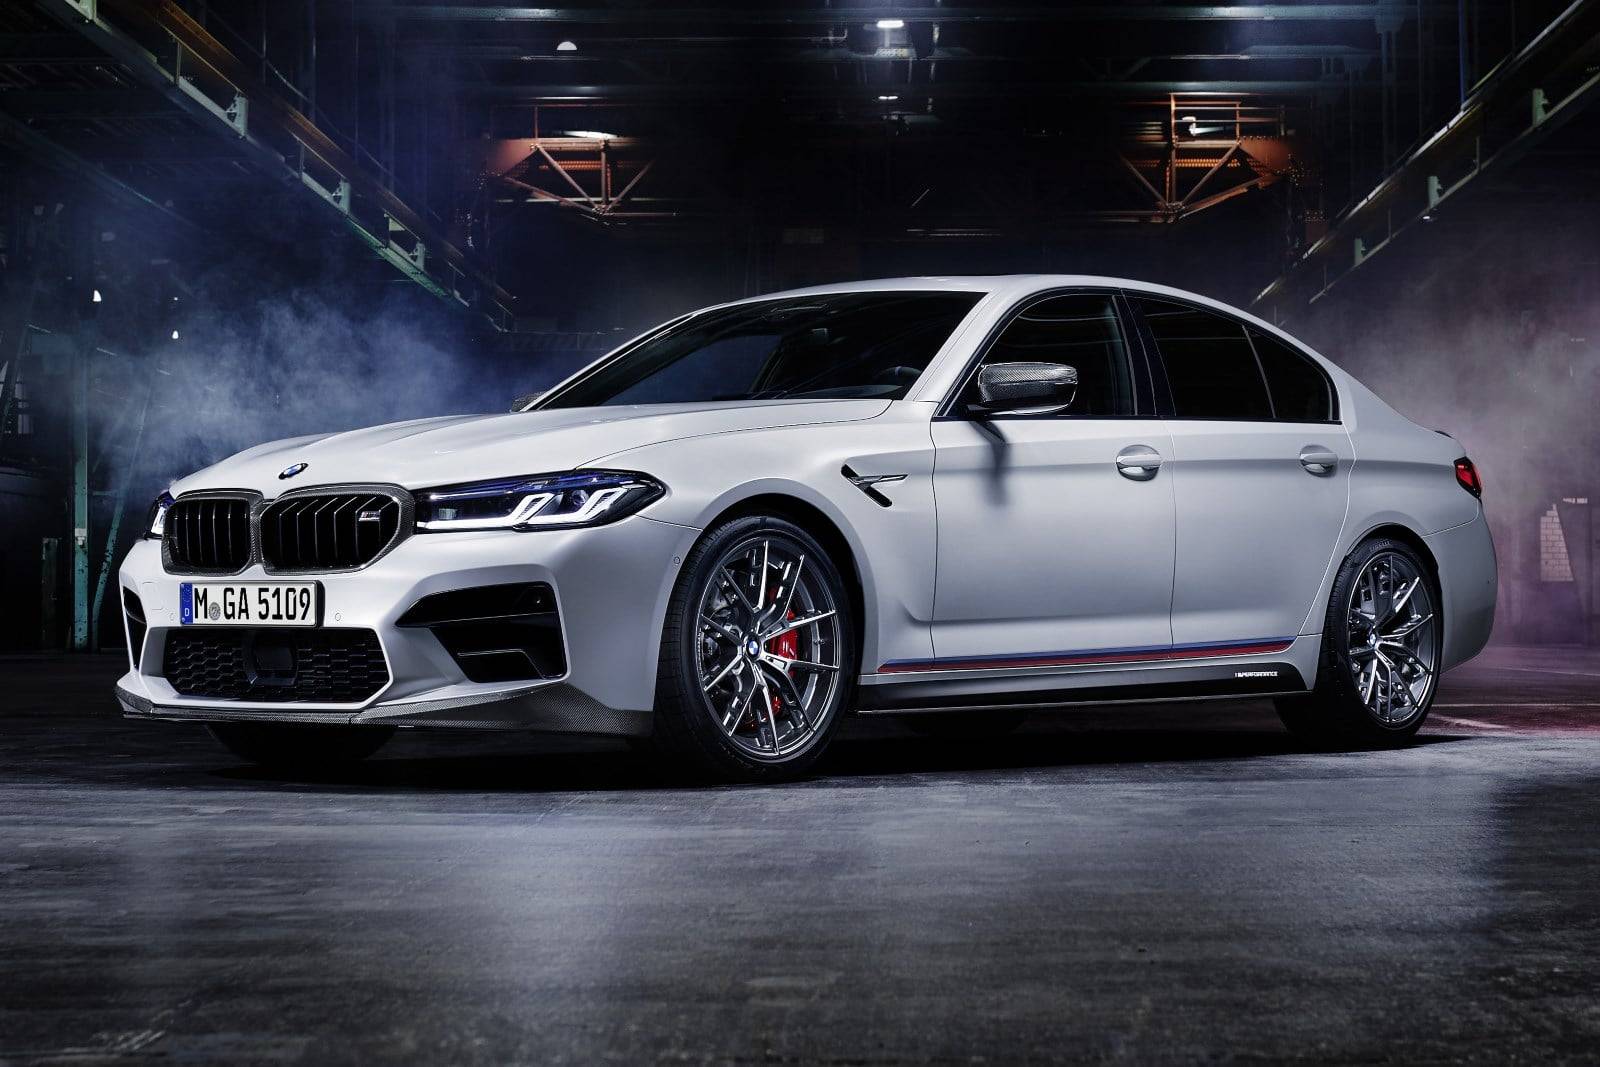 Bmw m5 competition 2012